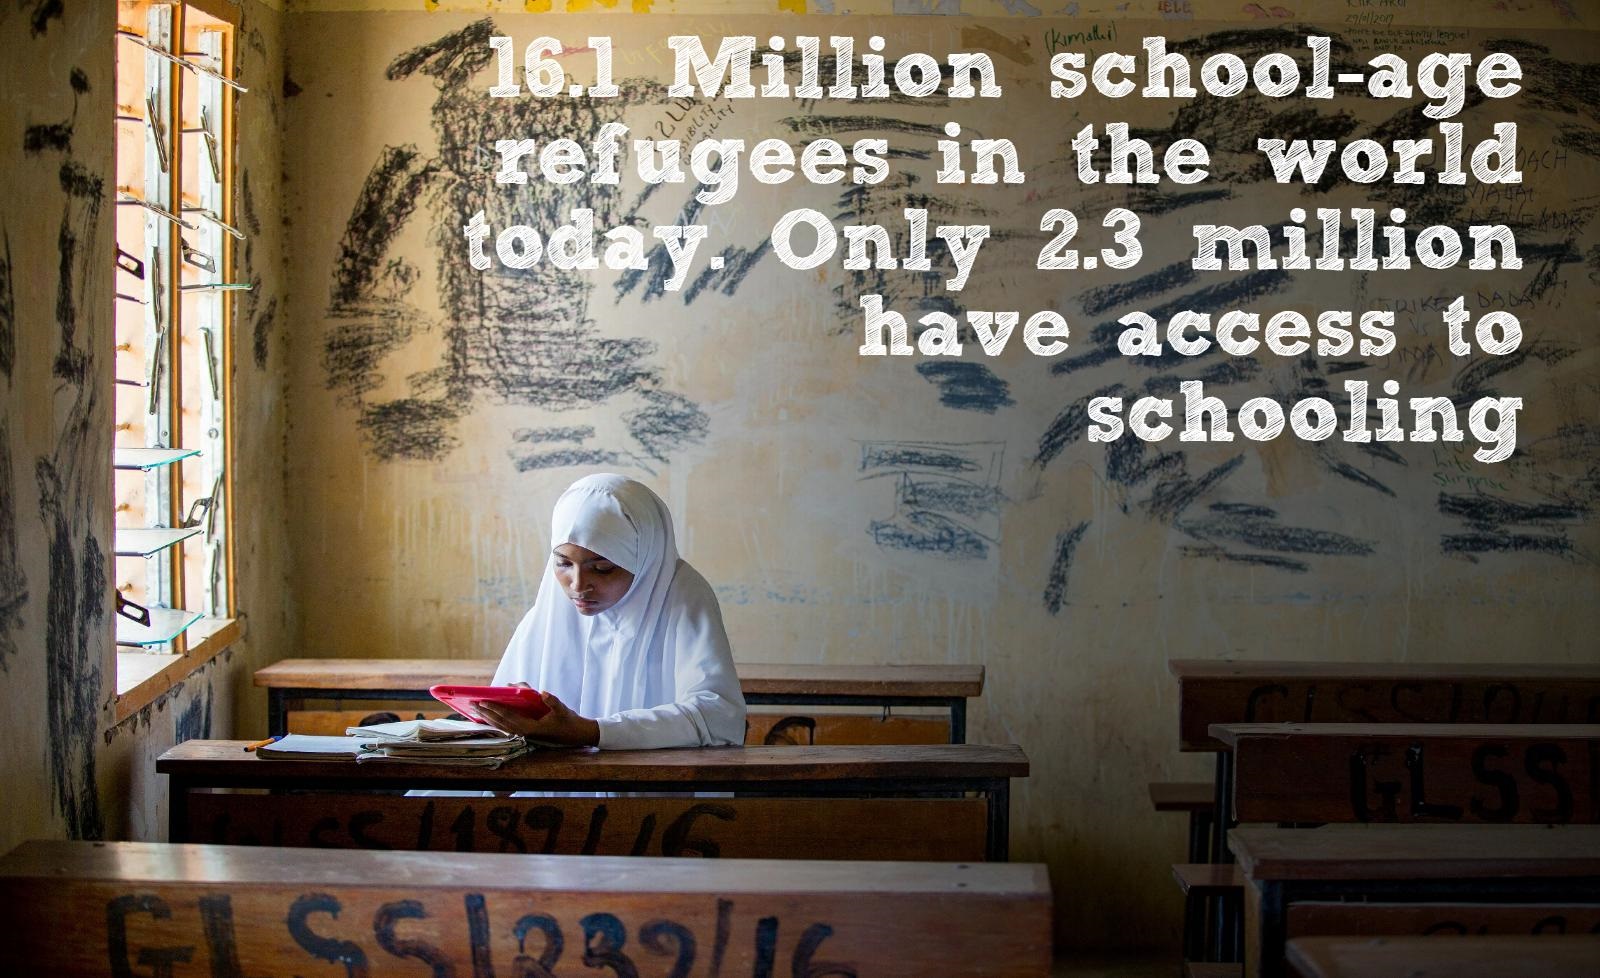 Of the 16.1 million school age refugees across the world, only 2.3 million have access to schooling.